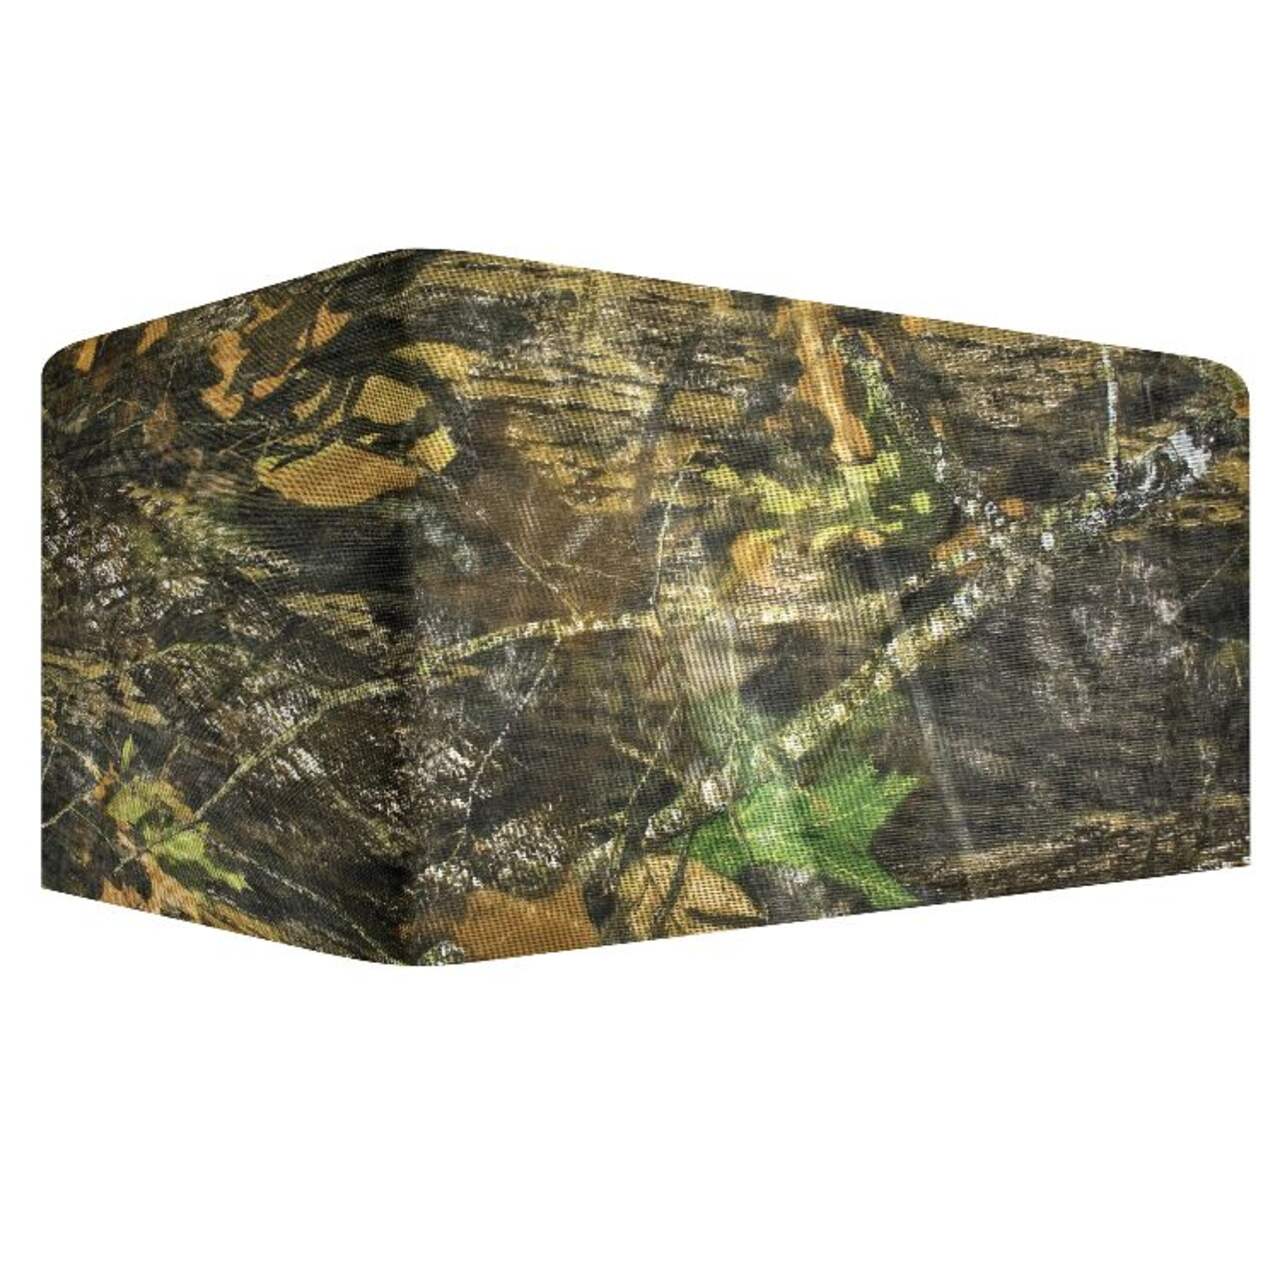 https://media-www.canadiantire.ca/product/playing/hunting/hunting-accessories/0750767/camo-netting-break-up-36281a72-3579-427e-945f-1f1b4c14851b-jpgrendition.jpg?imdensity=1&imwidth=640&impolicy=mZoom